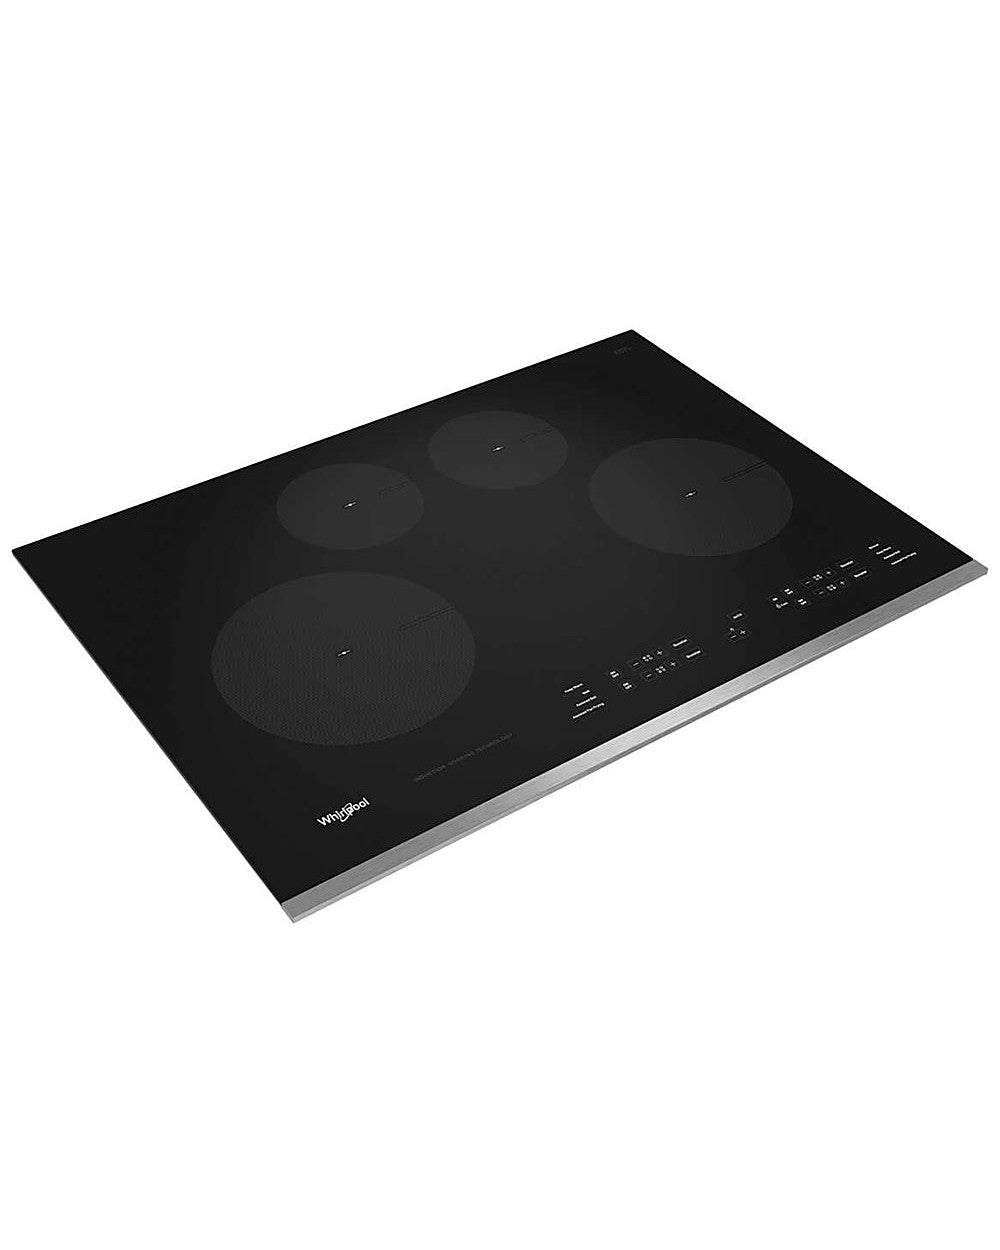 WHIRLPOOL WCI55US0JS 30-Inch Induction Cooktop